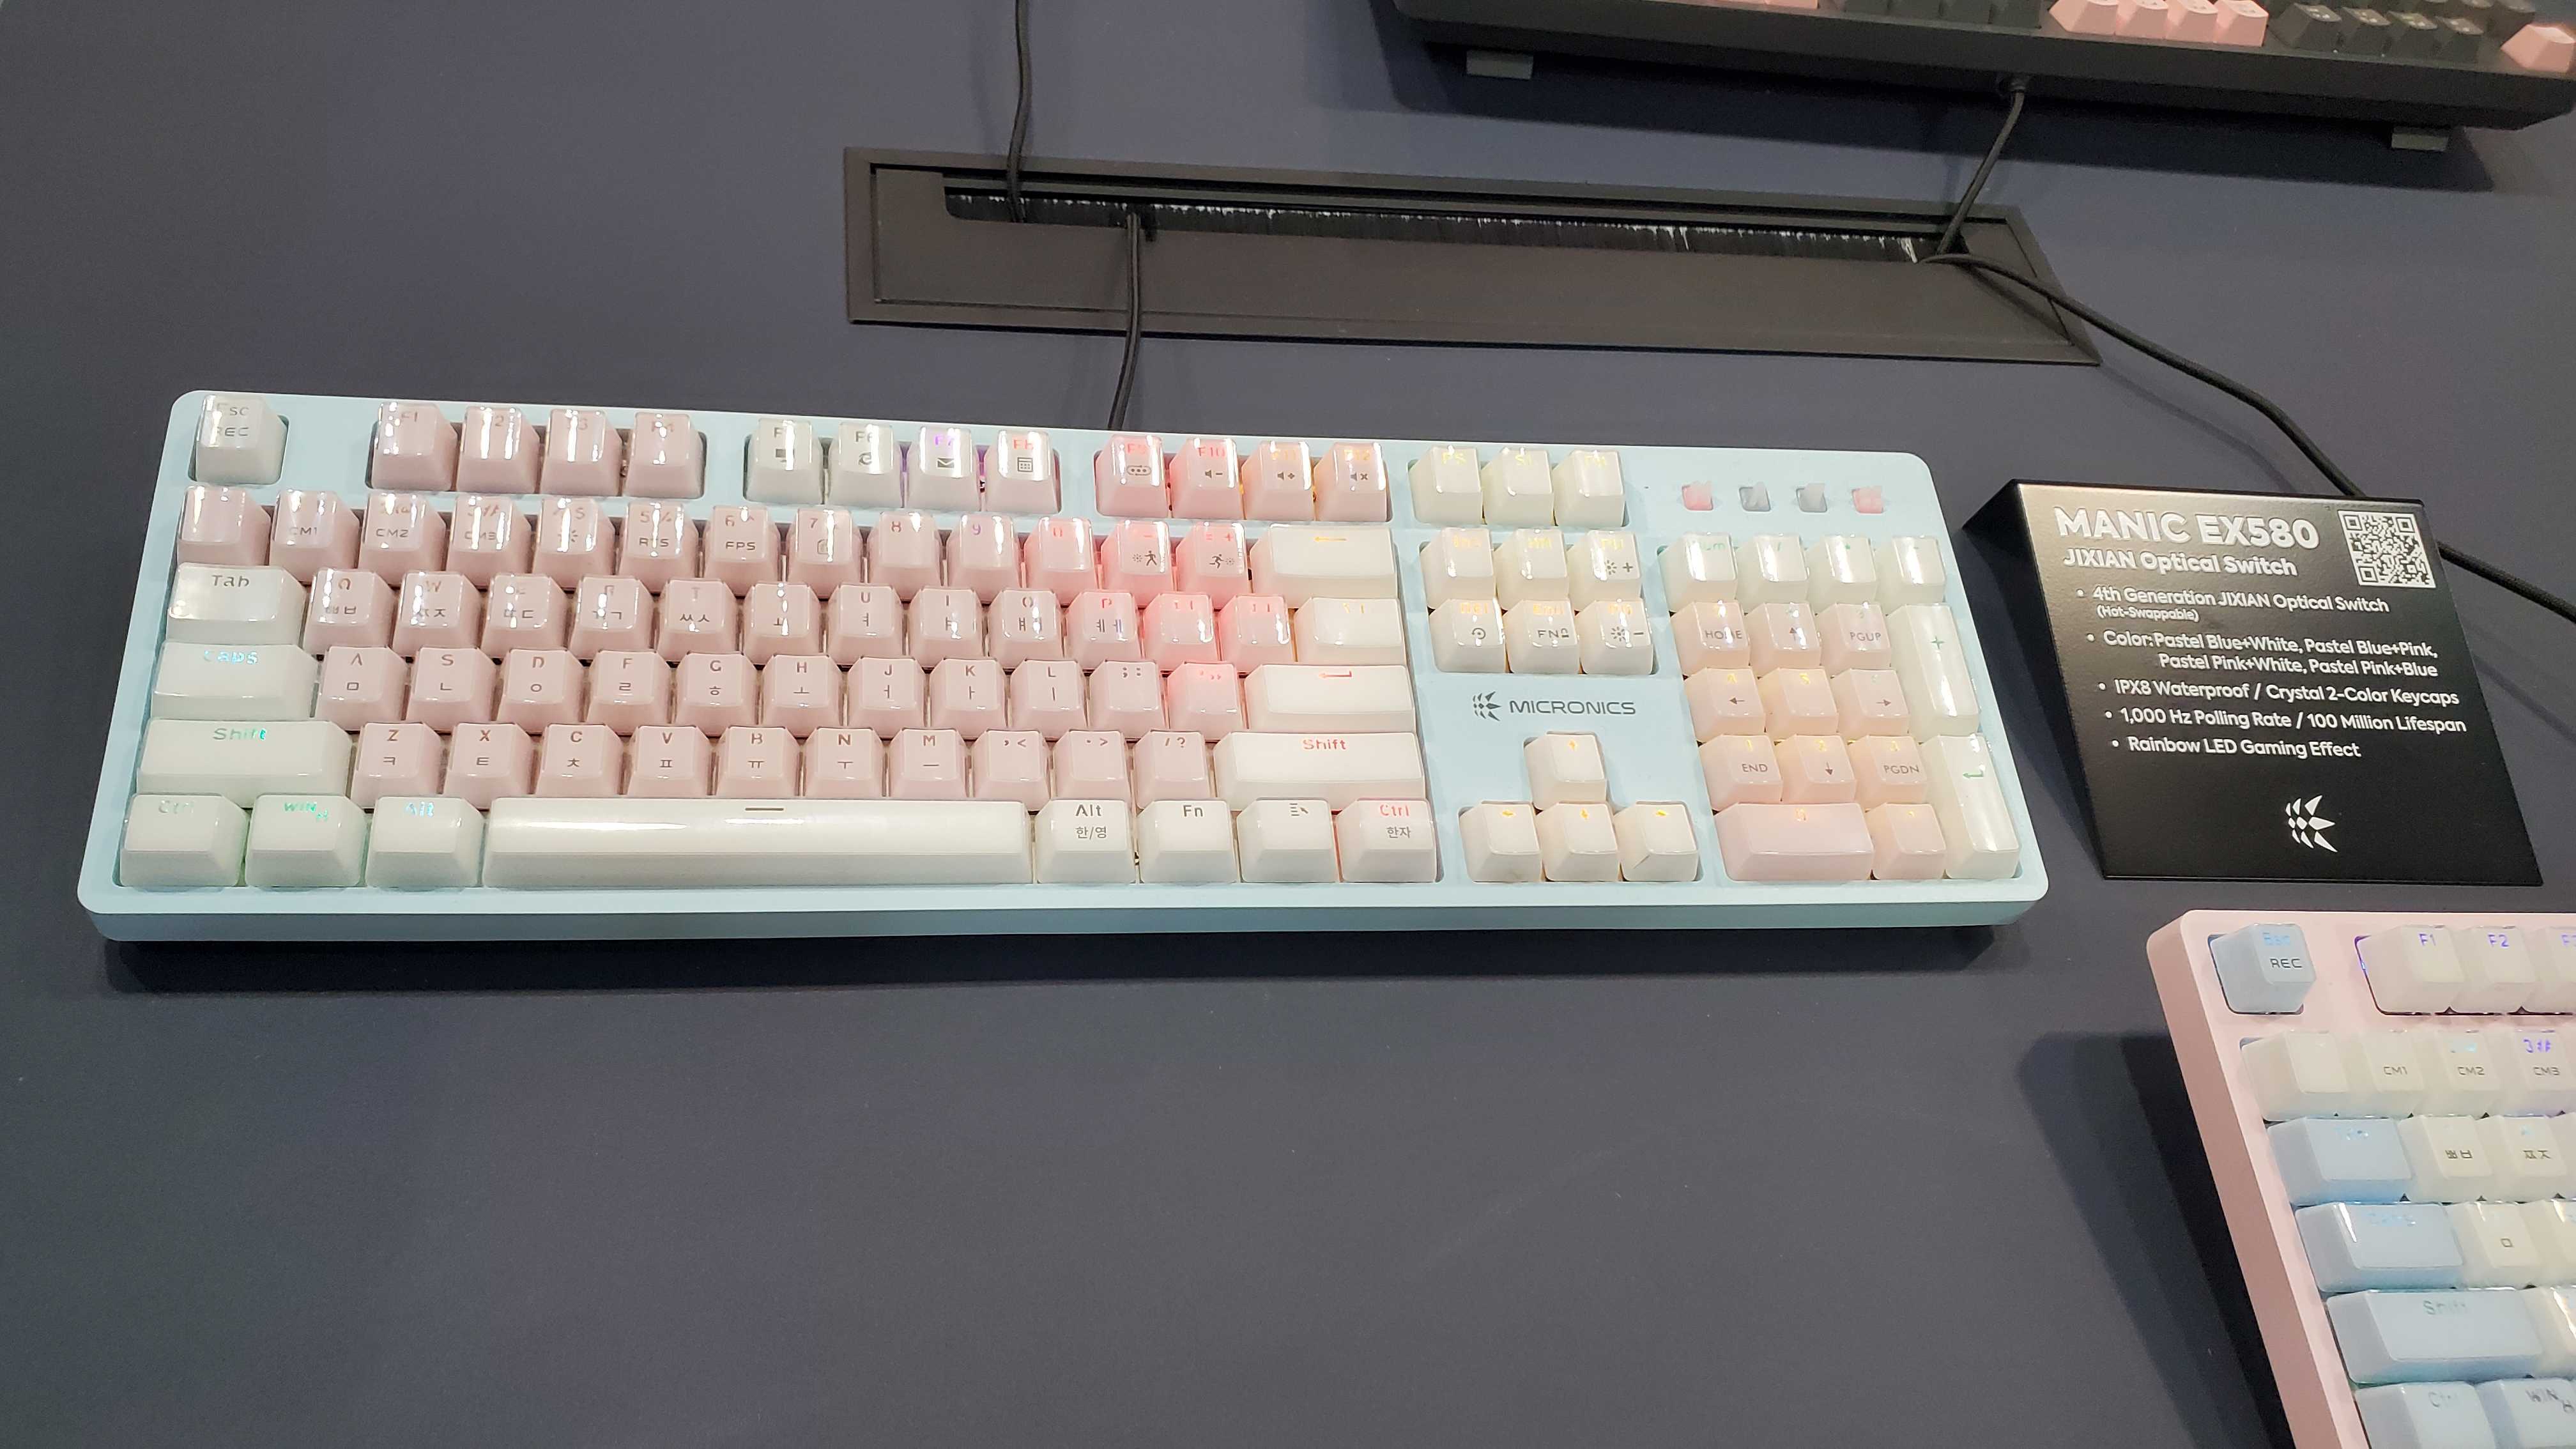 pink and blue keyboard with backlight